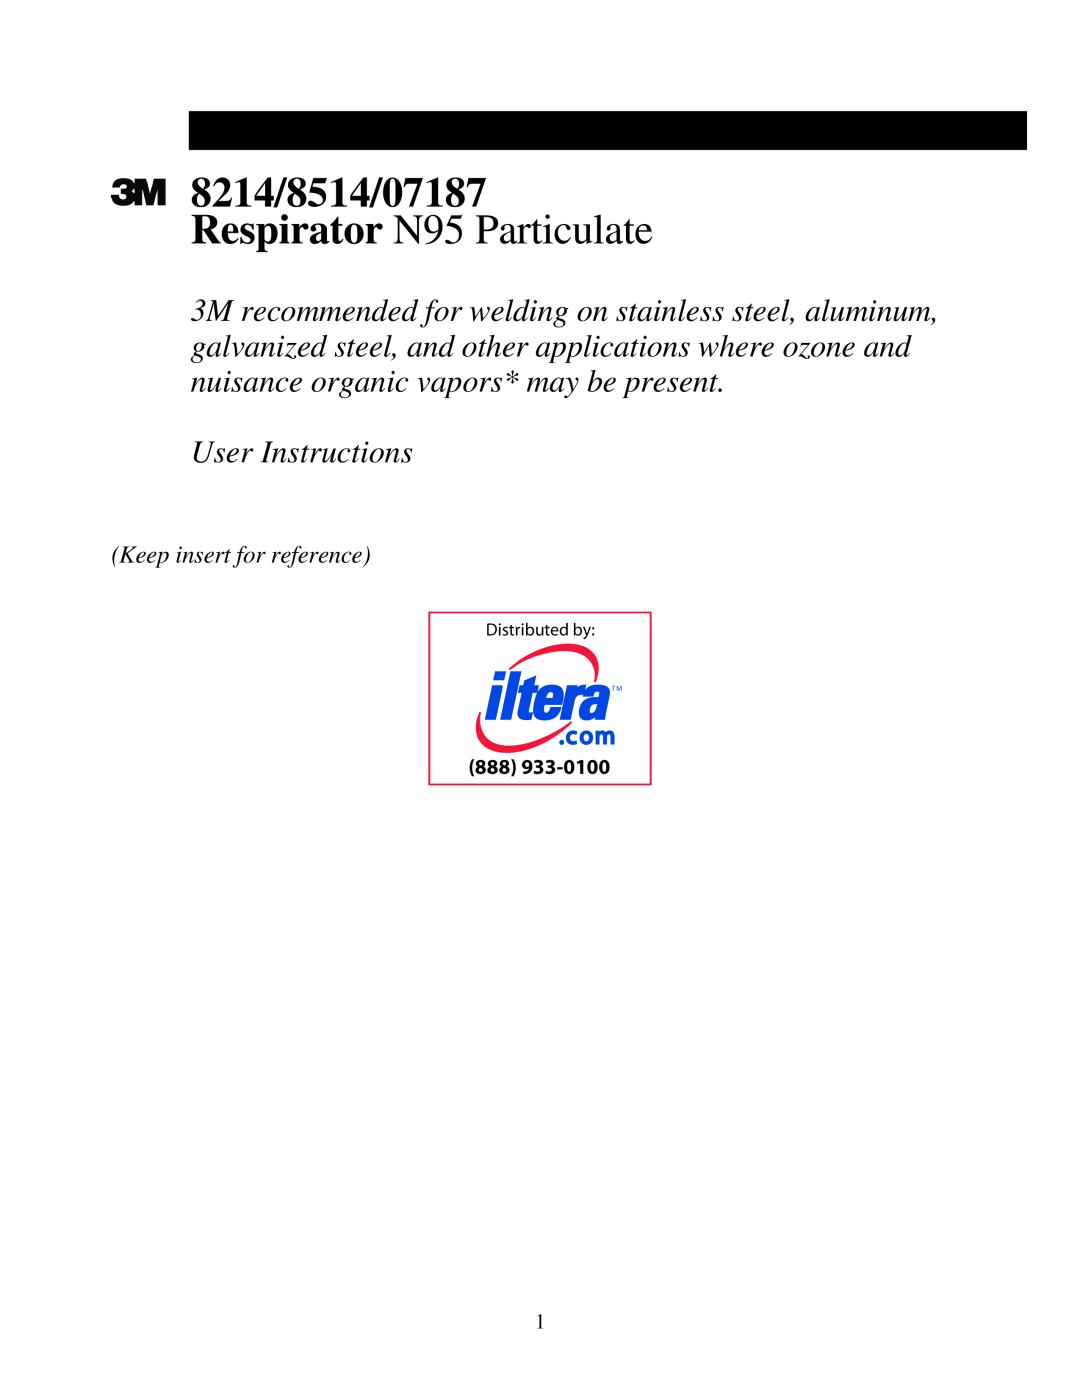 Filtera manual 8214/8514/07187 Respirator N95 Particulate, User Instructions, Keep insert for reference, Distributed by 